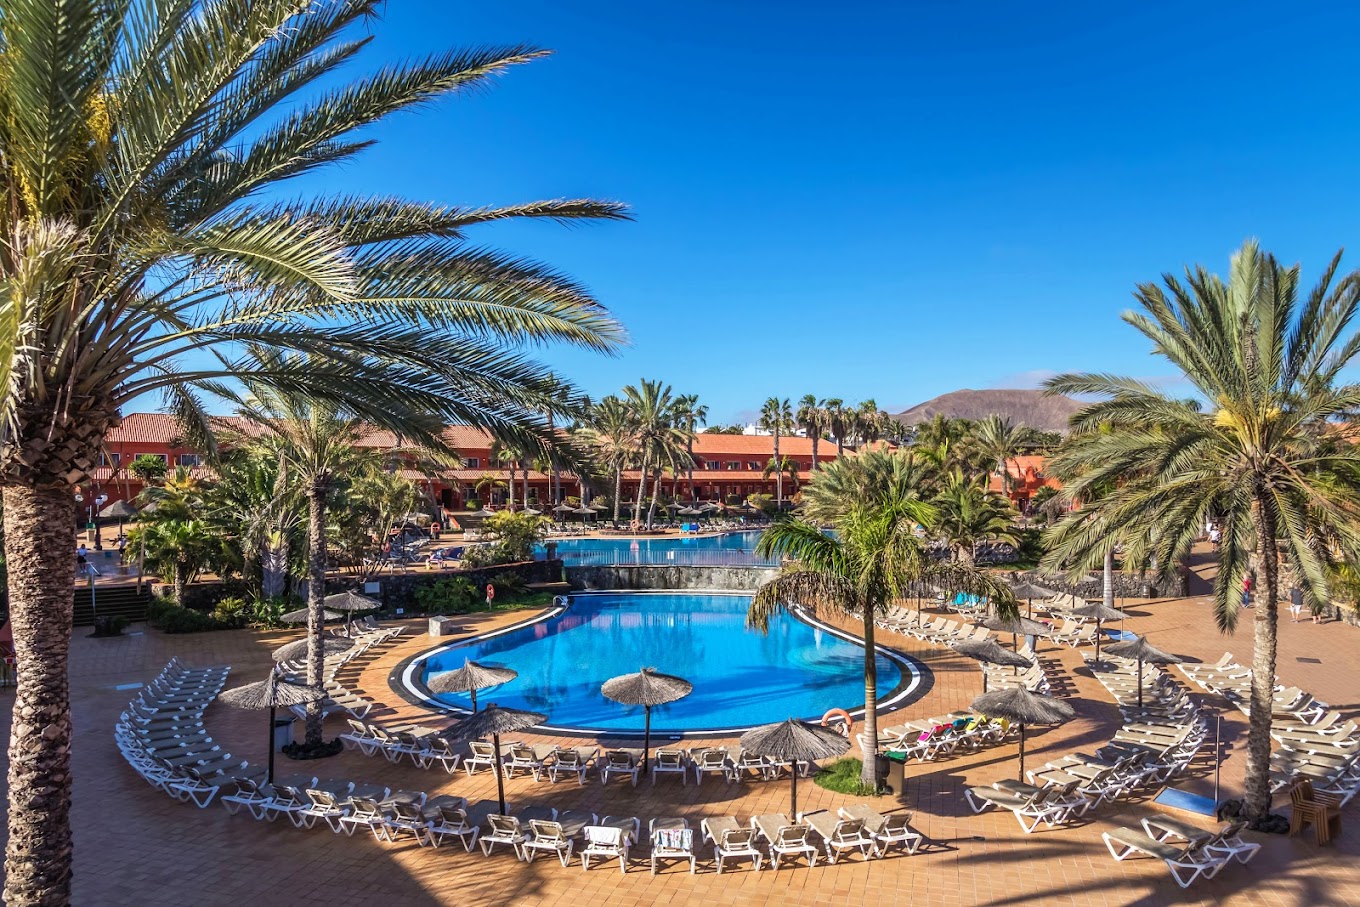 HD Hotels buys the Oasis Village hotel in Fuerteventura